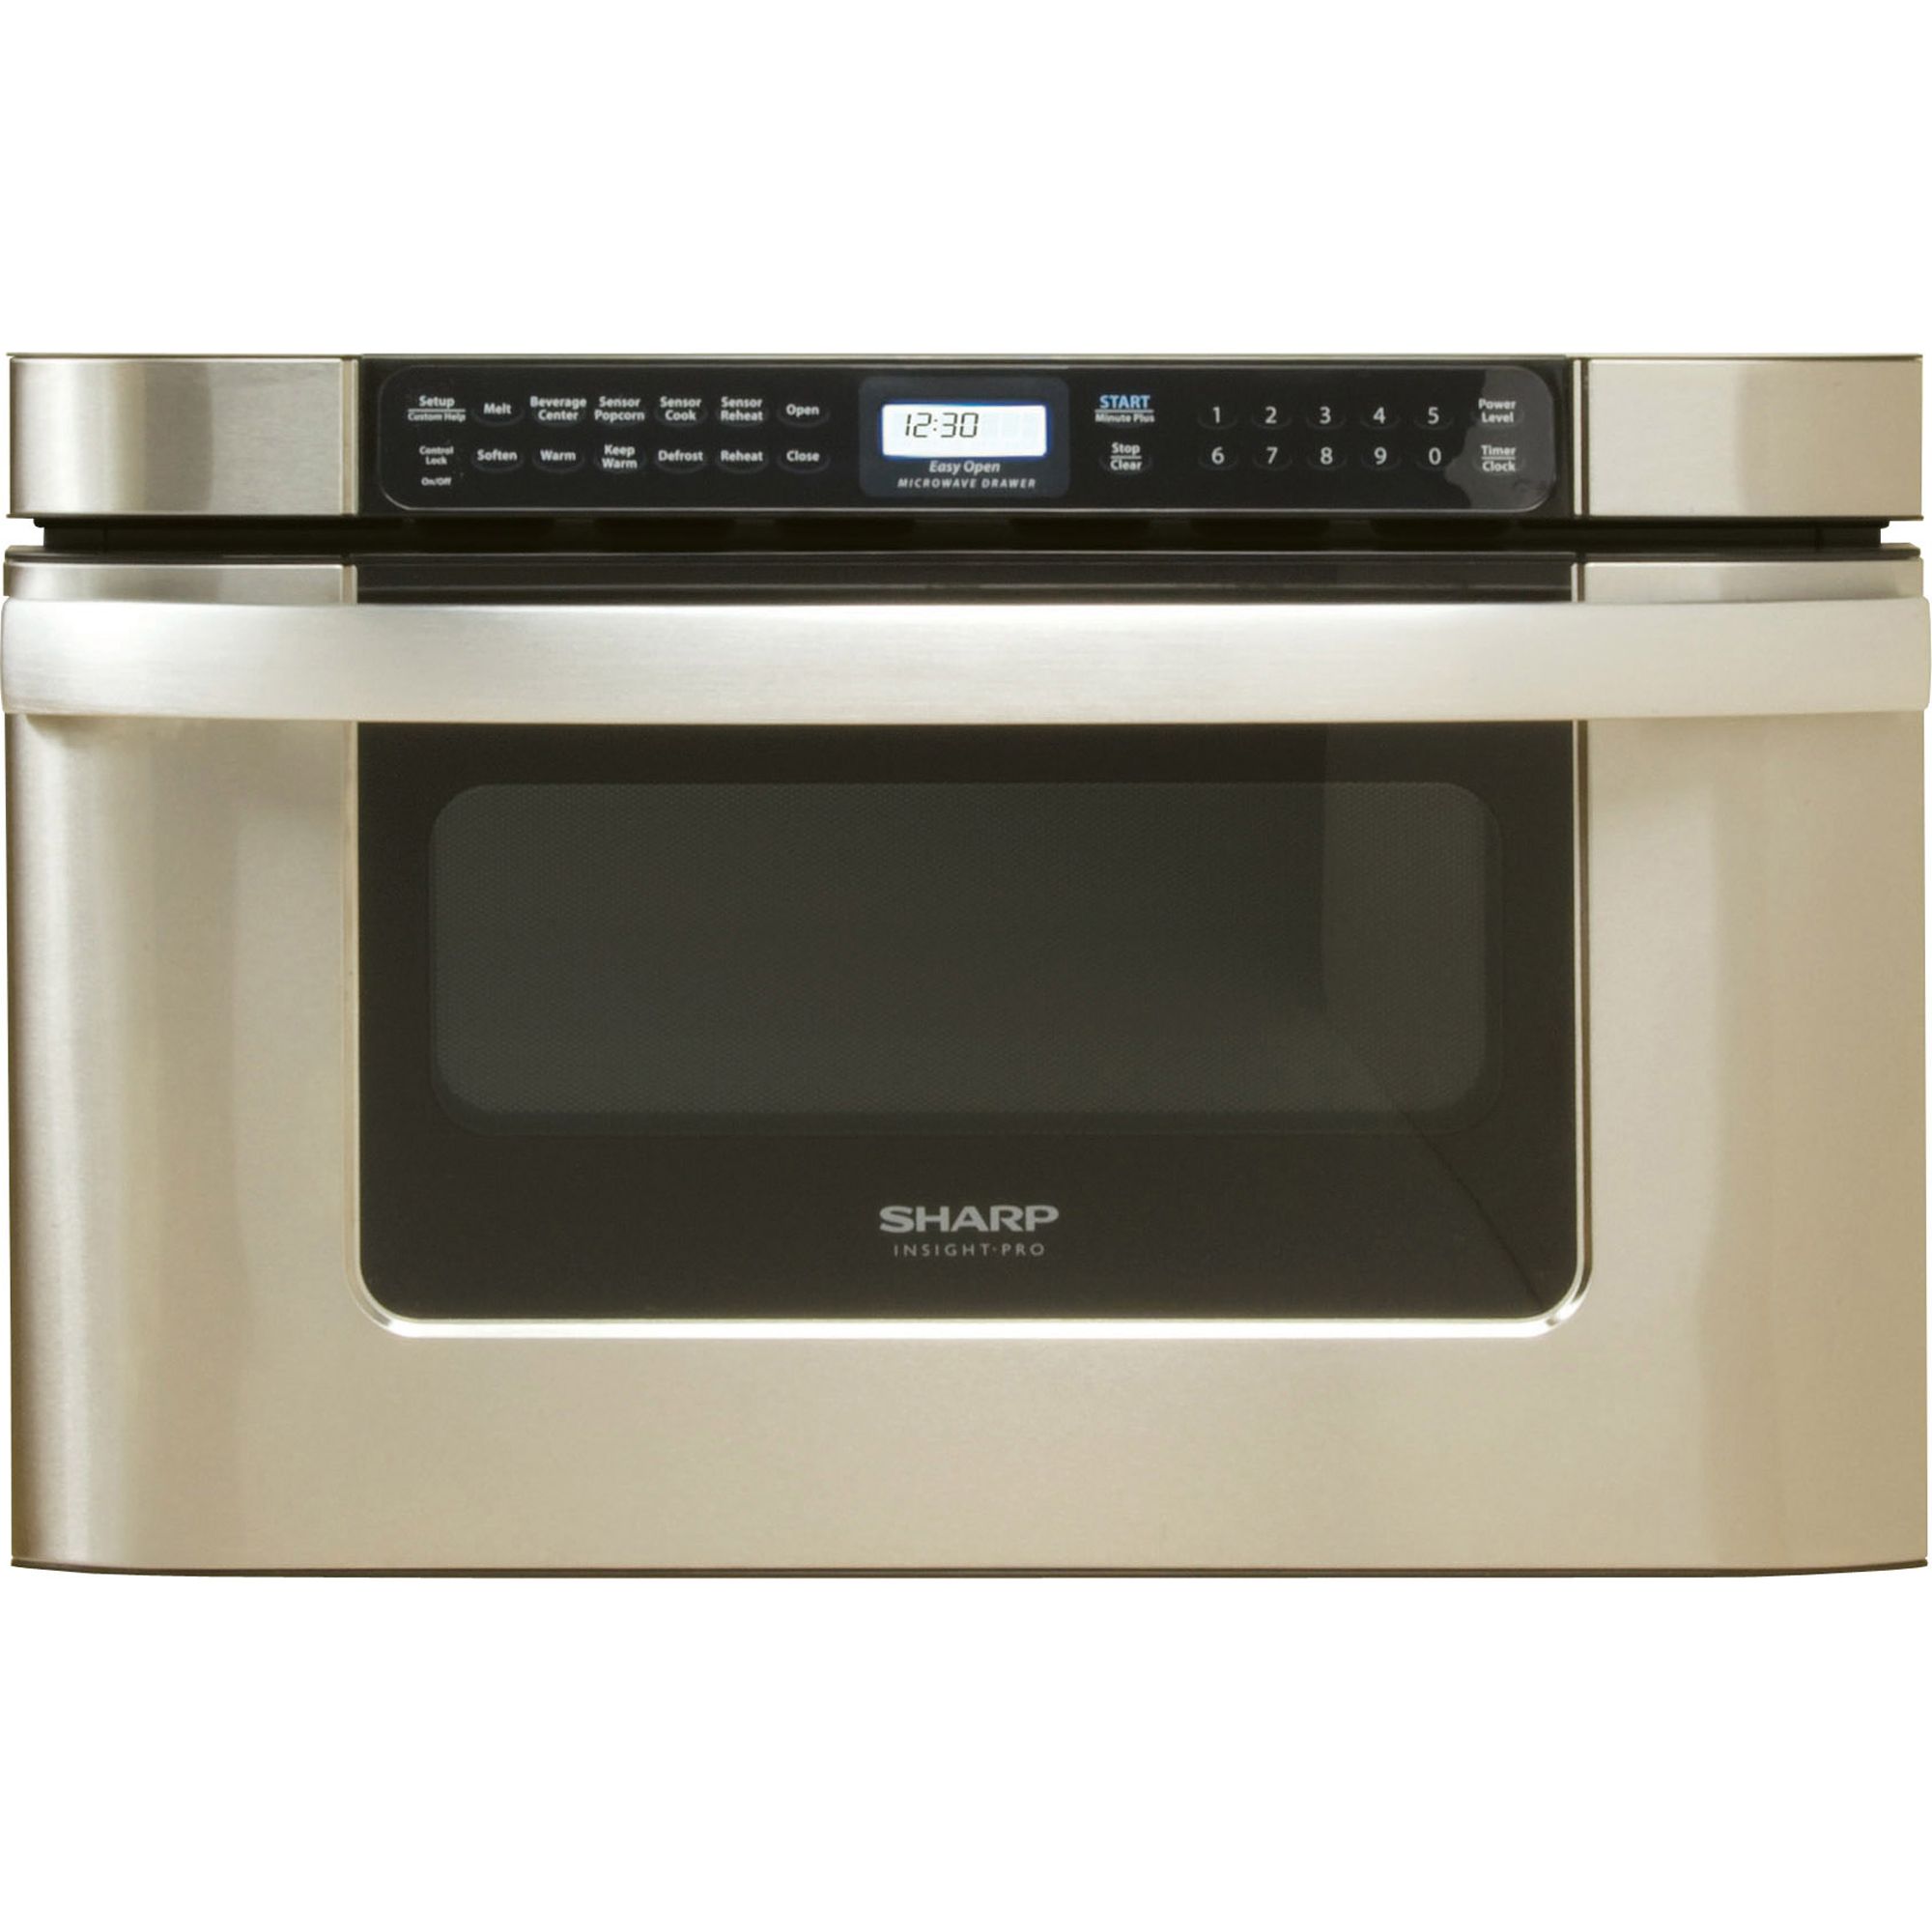 Sharp 24 1.2 cu. ft. Built-In Microwave Drawer Oven - Stainless Steel